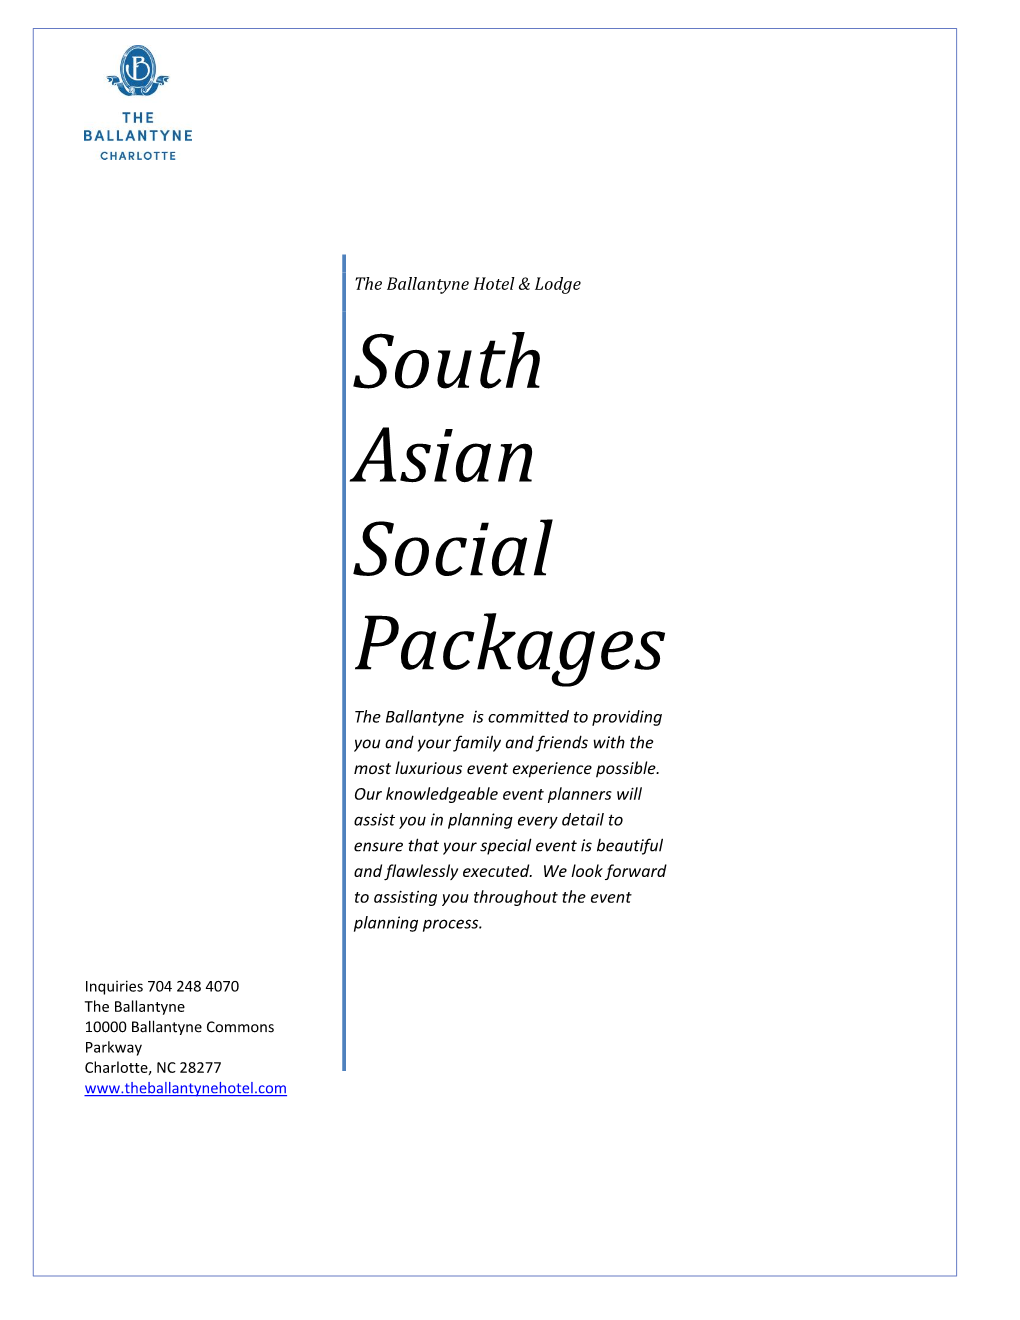 South Asian Social Packages